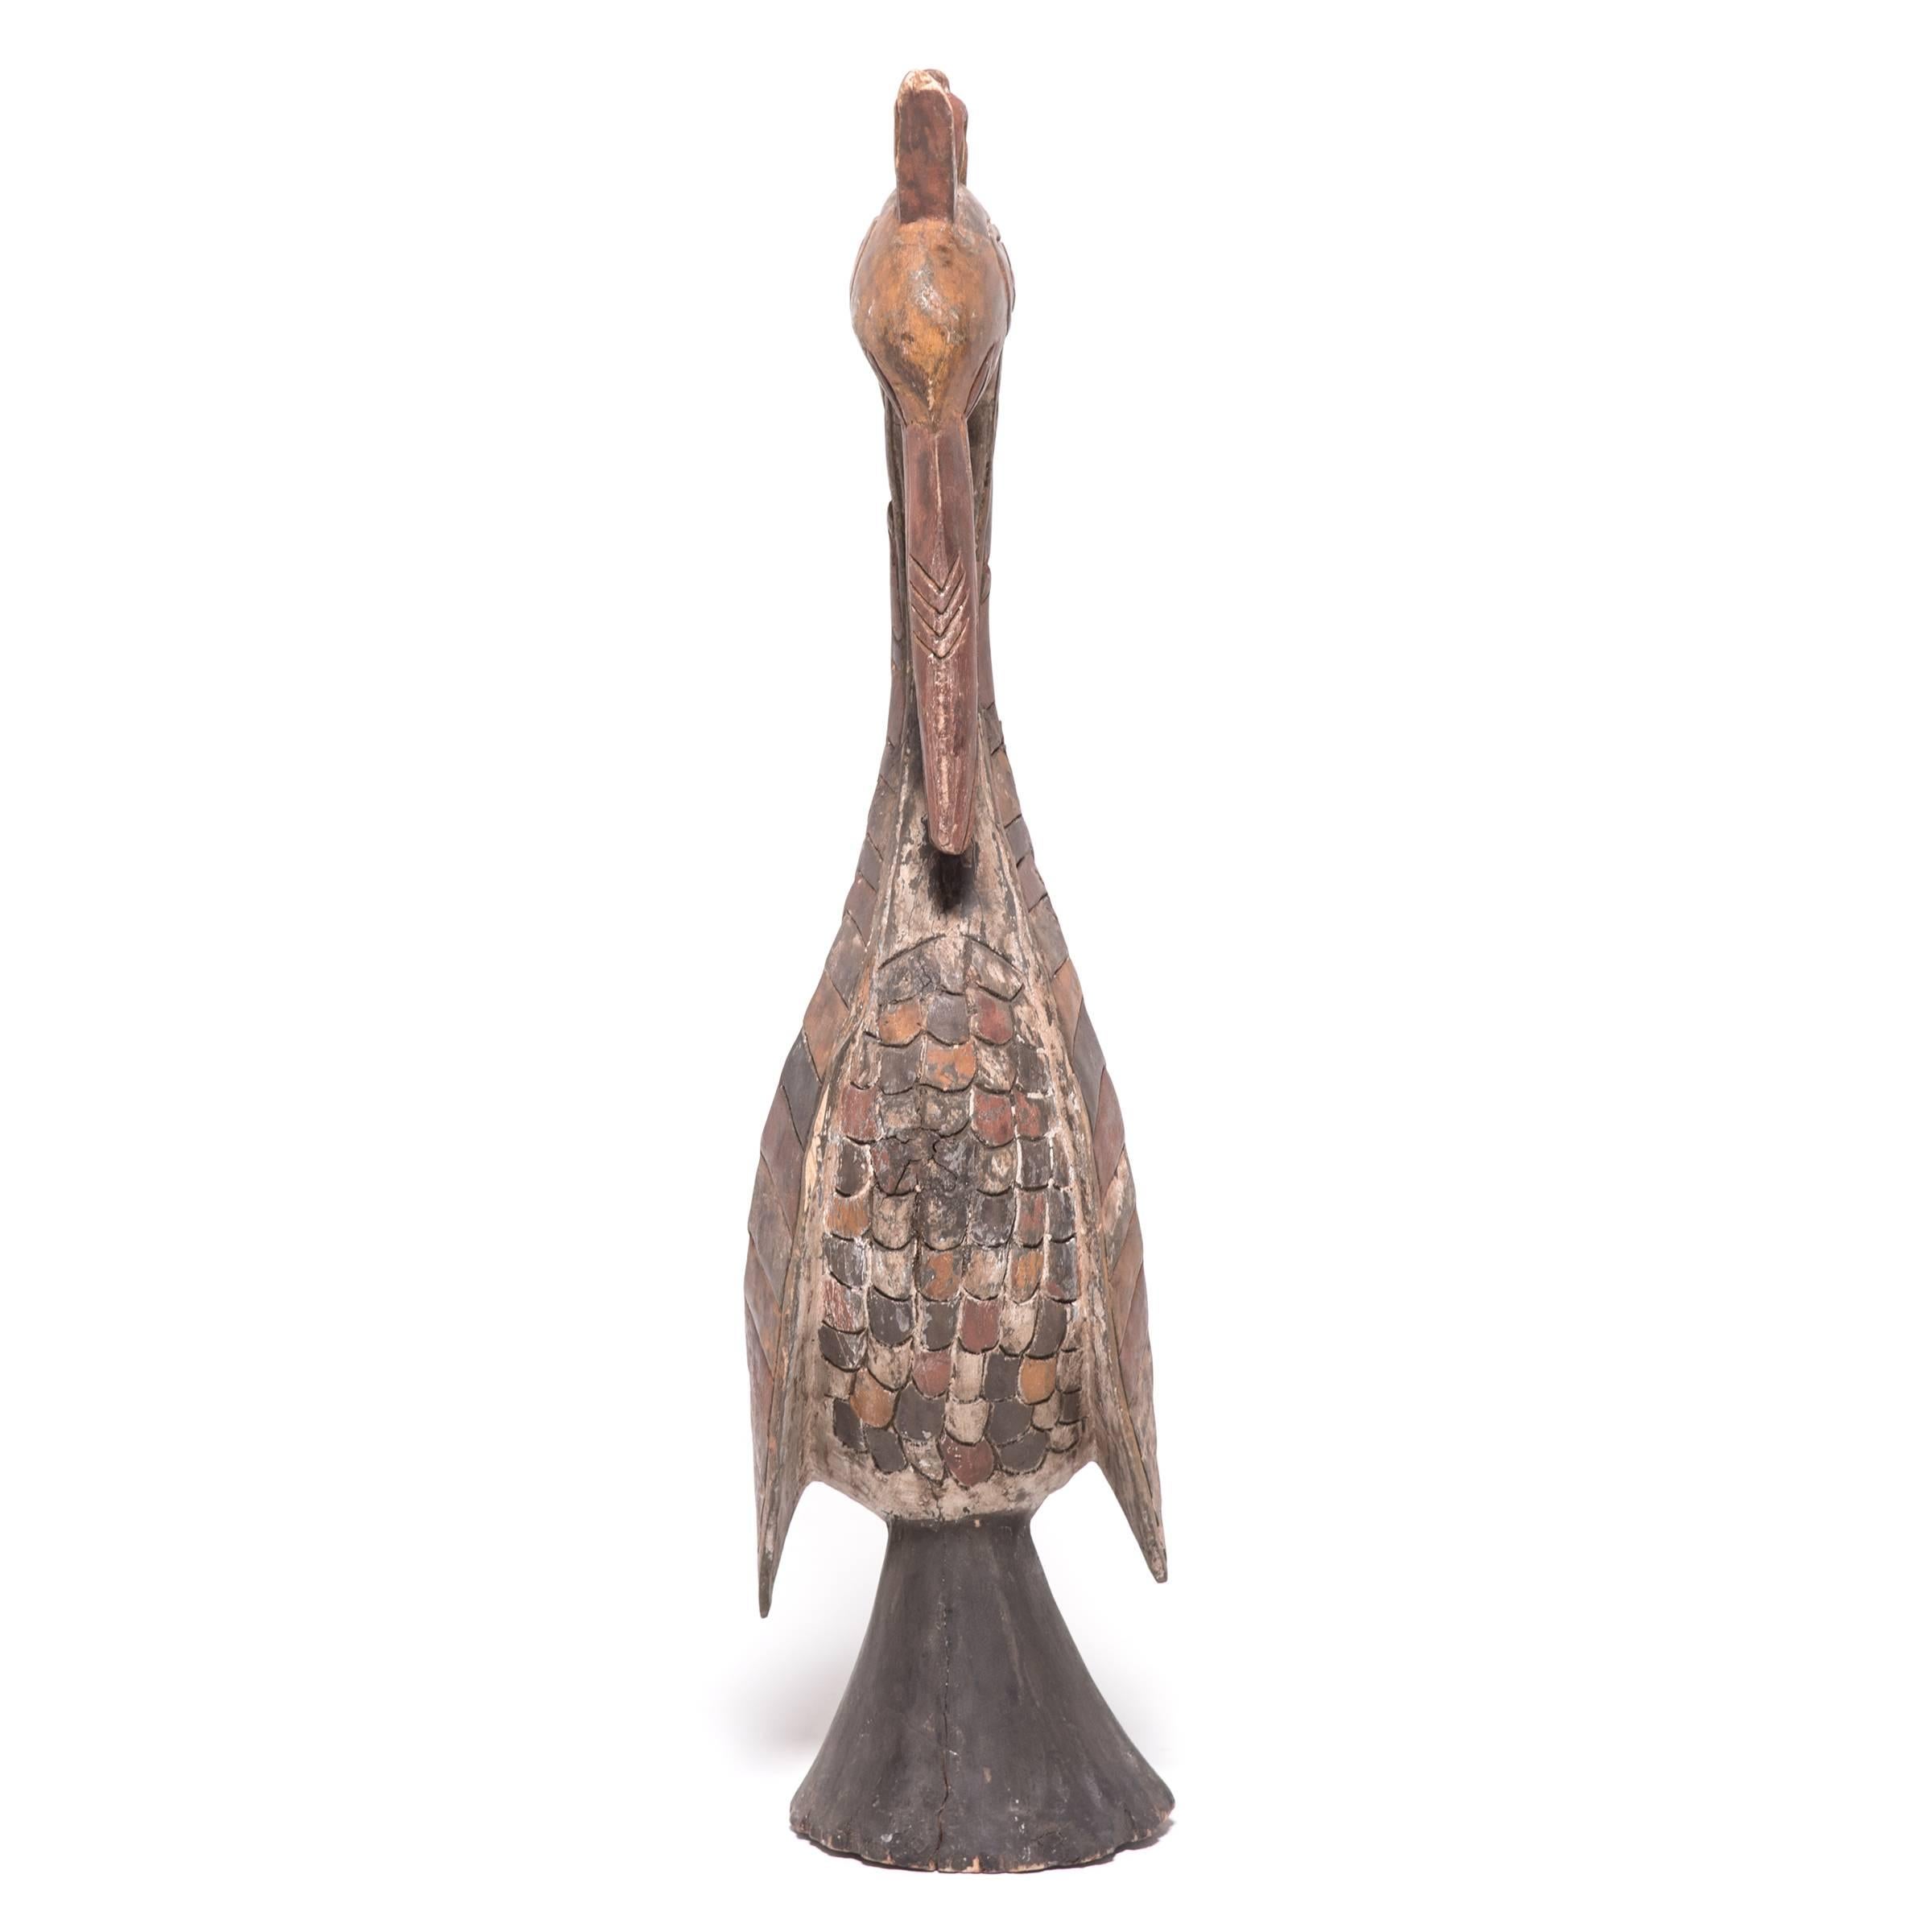 The Baga believed birds to be powerful protectors of the harvest and wards against witchcraft. Every home featured one of these honored sculptures. The bird's posture, gaze, and hand-carved plumage exude a sense of strength and dignity. The